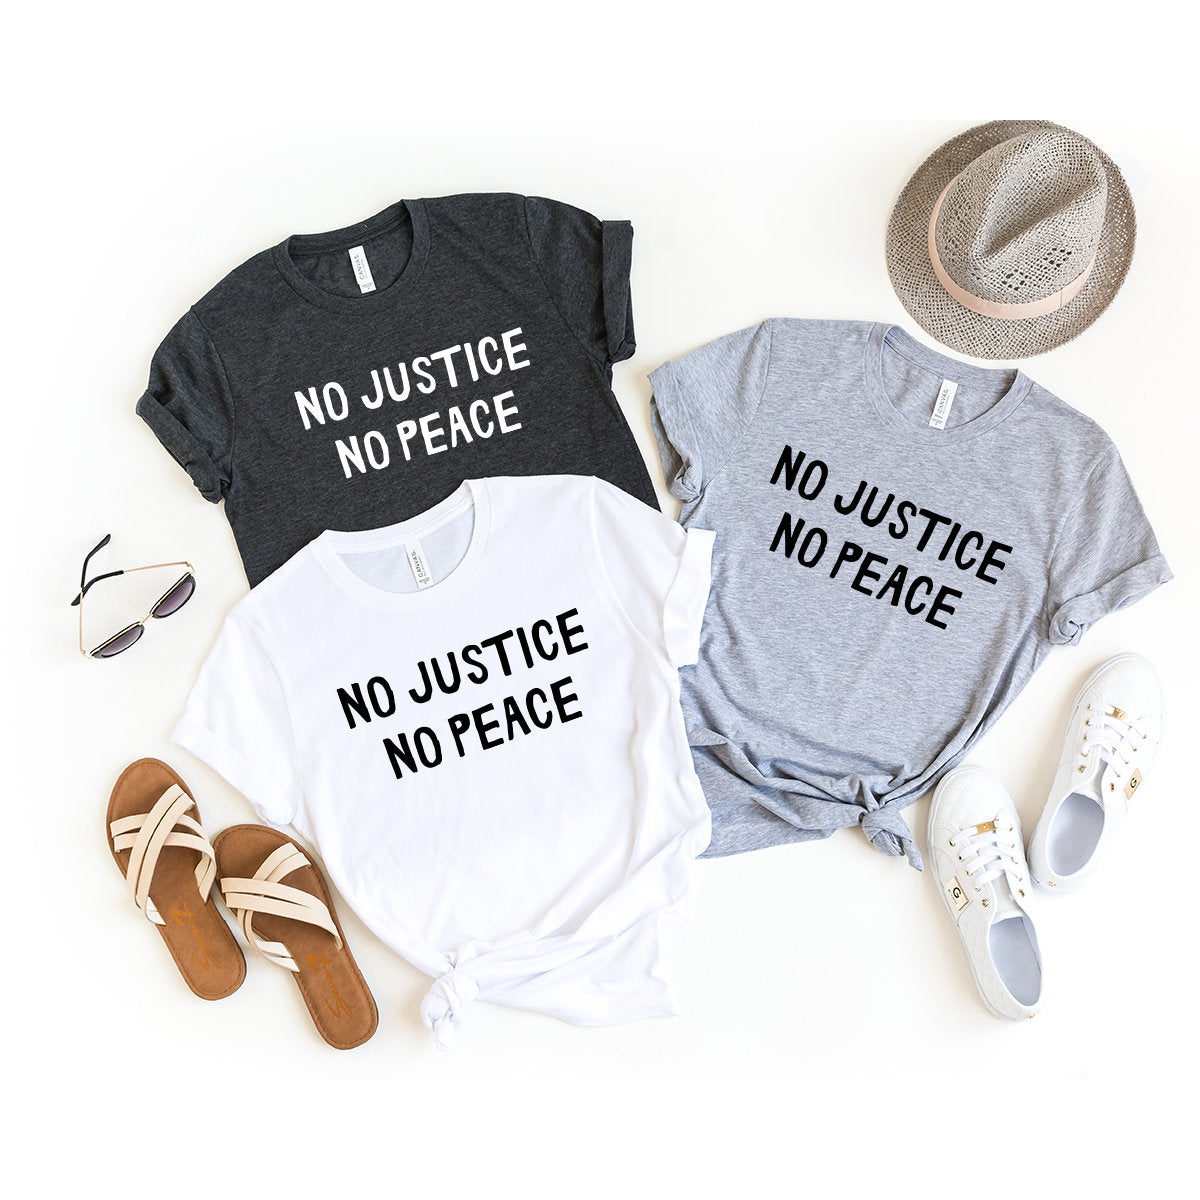 Racial Equality Shirt, Justice Tee,No Justice No Peace T-Shirt, George Floyd Shirt, Lives Matter Shirt, I Can't Breathe Shirt - Fastdeliverytees.com